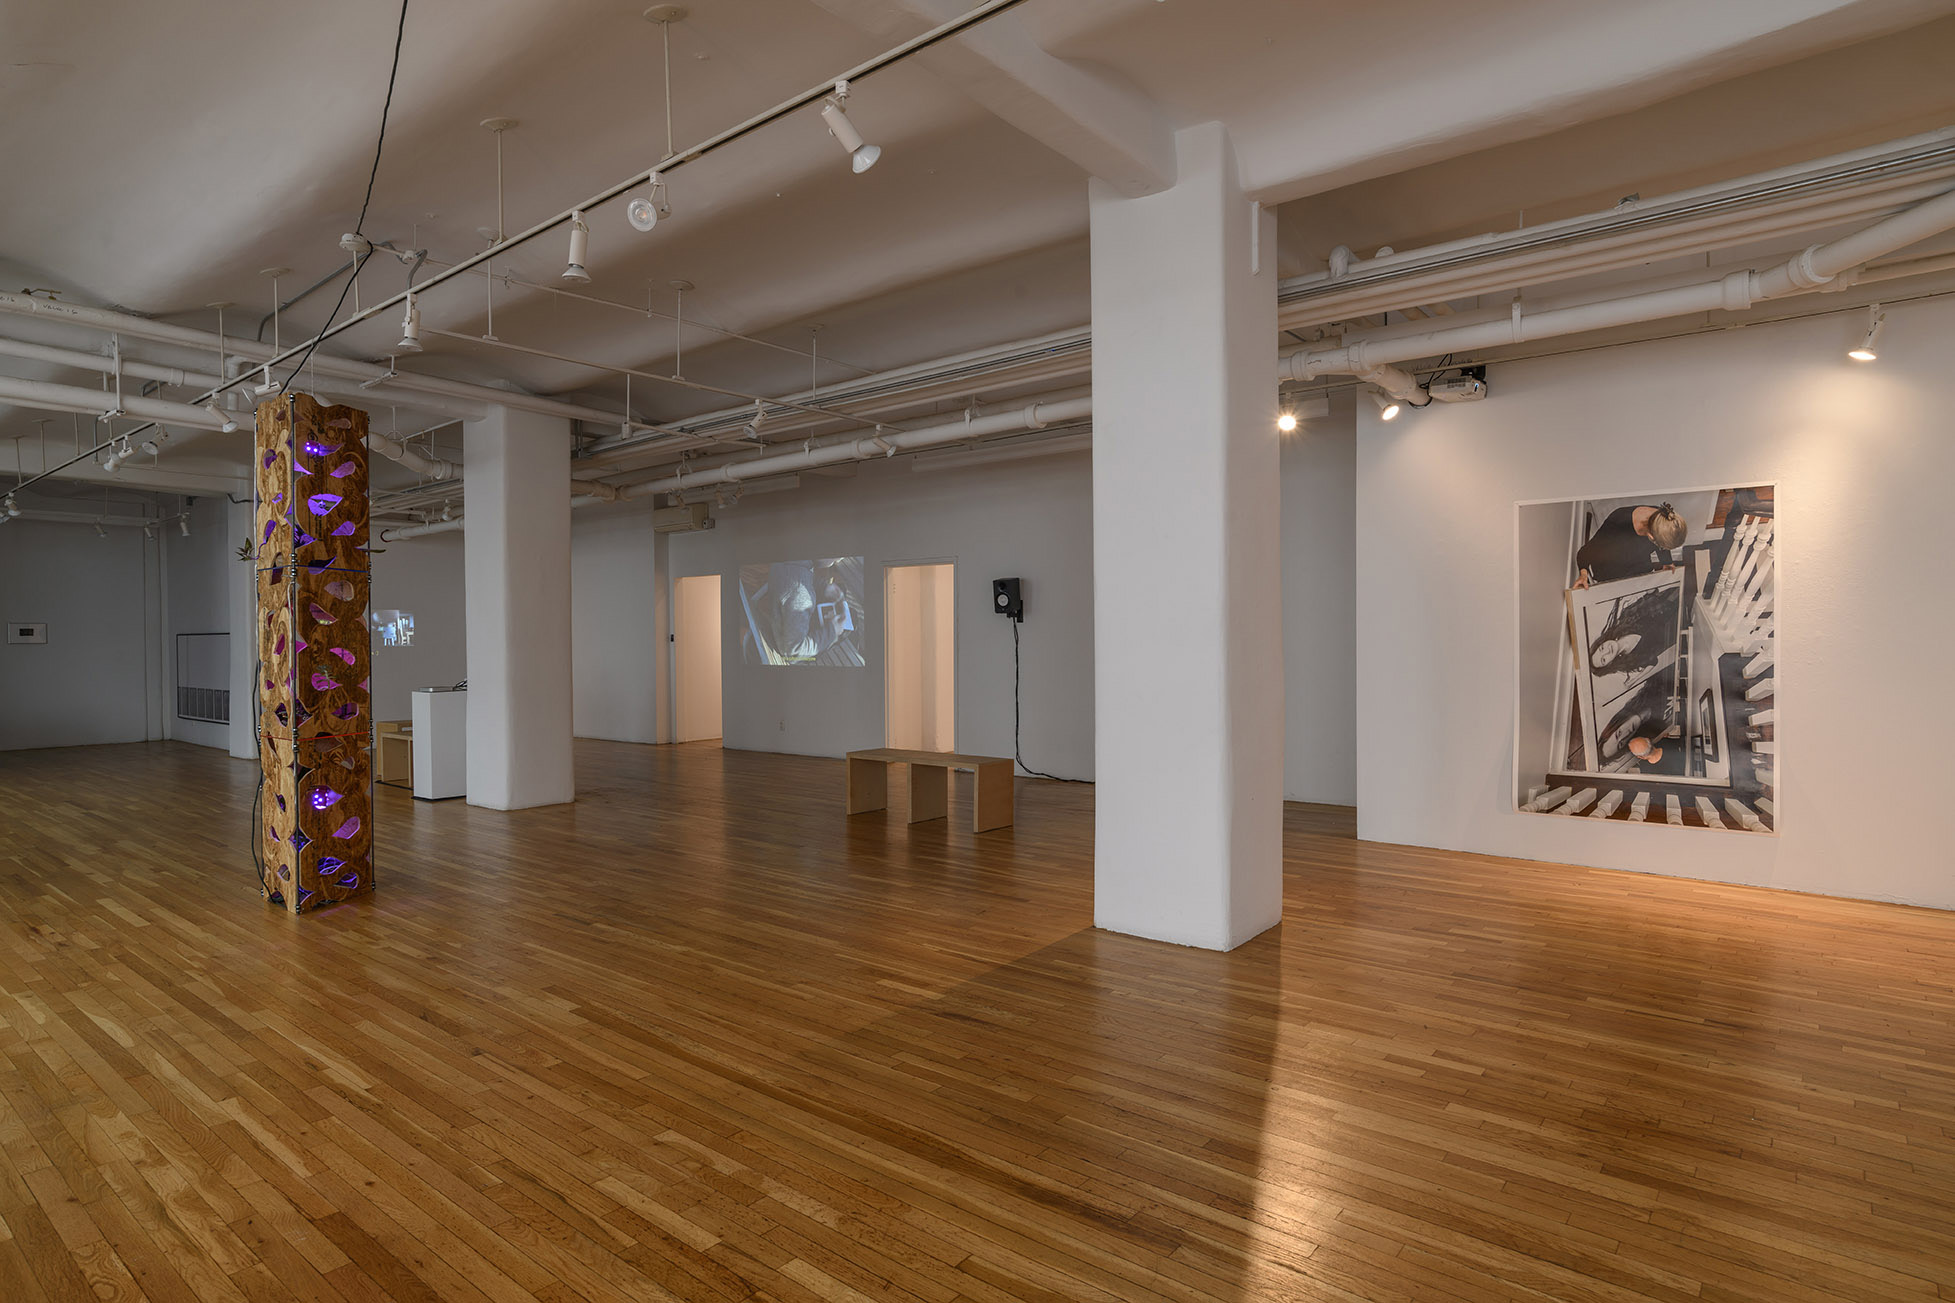 [A large open gallery with wooden flooring supported by two white concrete columns. Stationed near the two columns, almost midway between them, is a tall column-like wooden sculpture that nearly reaches the ceiling. The gallery’s lighting track is primarily turned off except for lights illuminating a large unframed color photograph hanging on a wall opposite the column-like wooden sculpture. Receding in space on the same side of the gallery as the photograph is a single speaker monitor mounted high on a white wall, two open doorways illuminated by warm light, and color video projections either side of the illuminated doorways.]